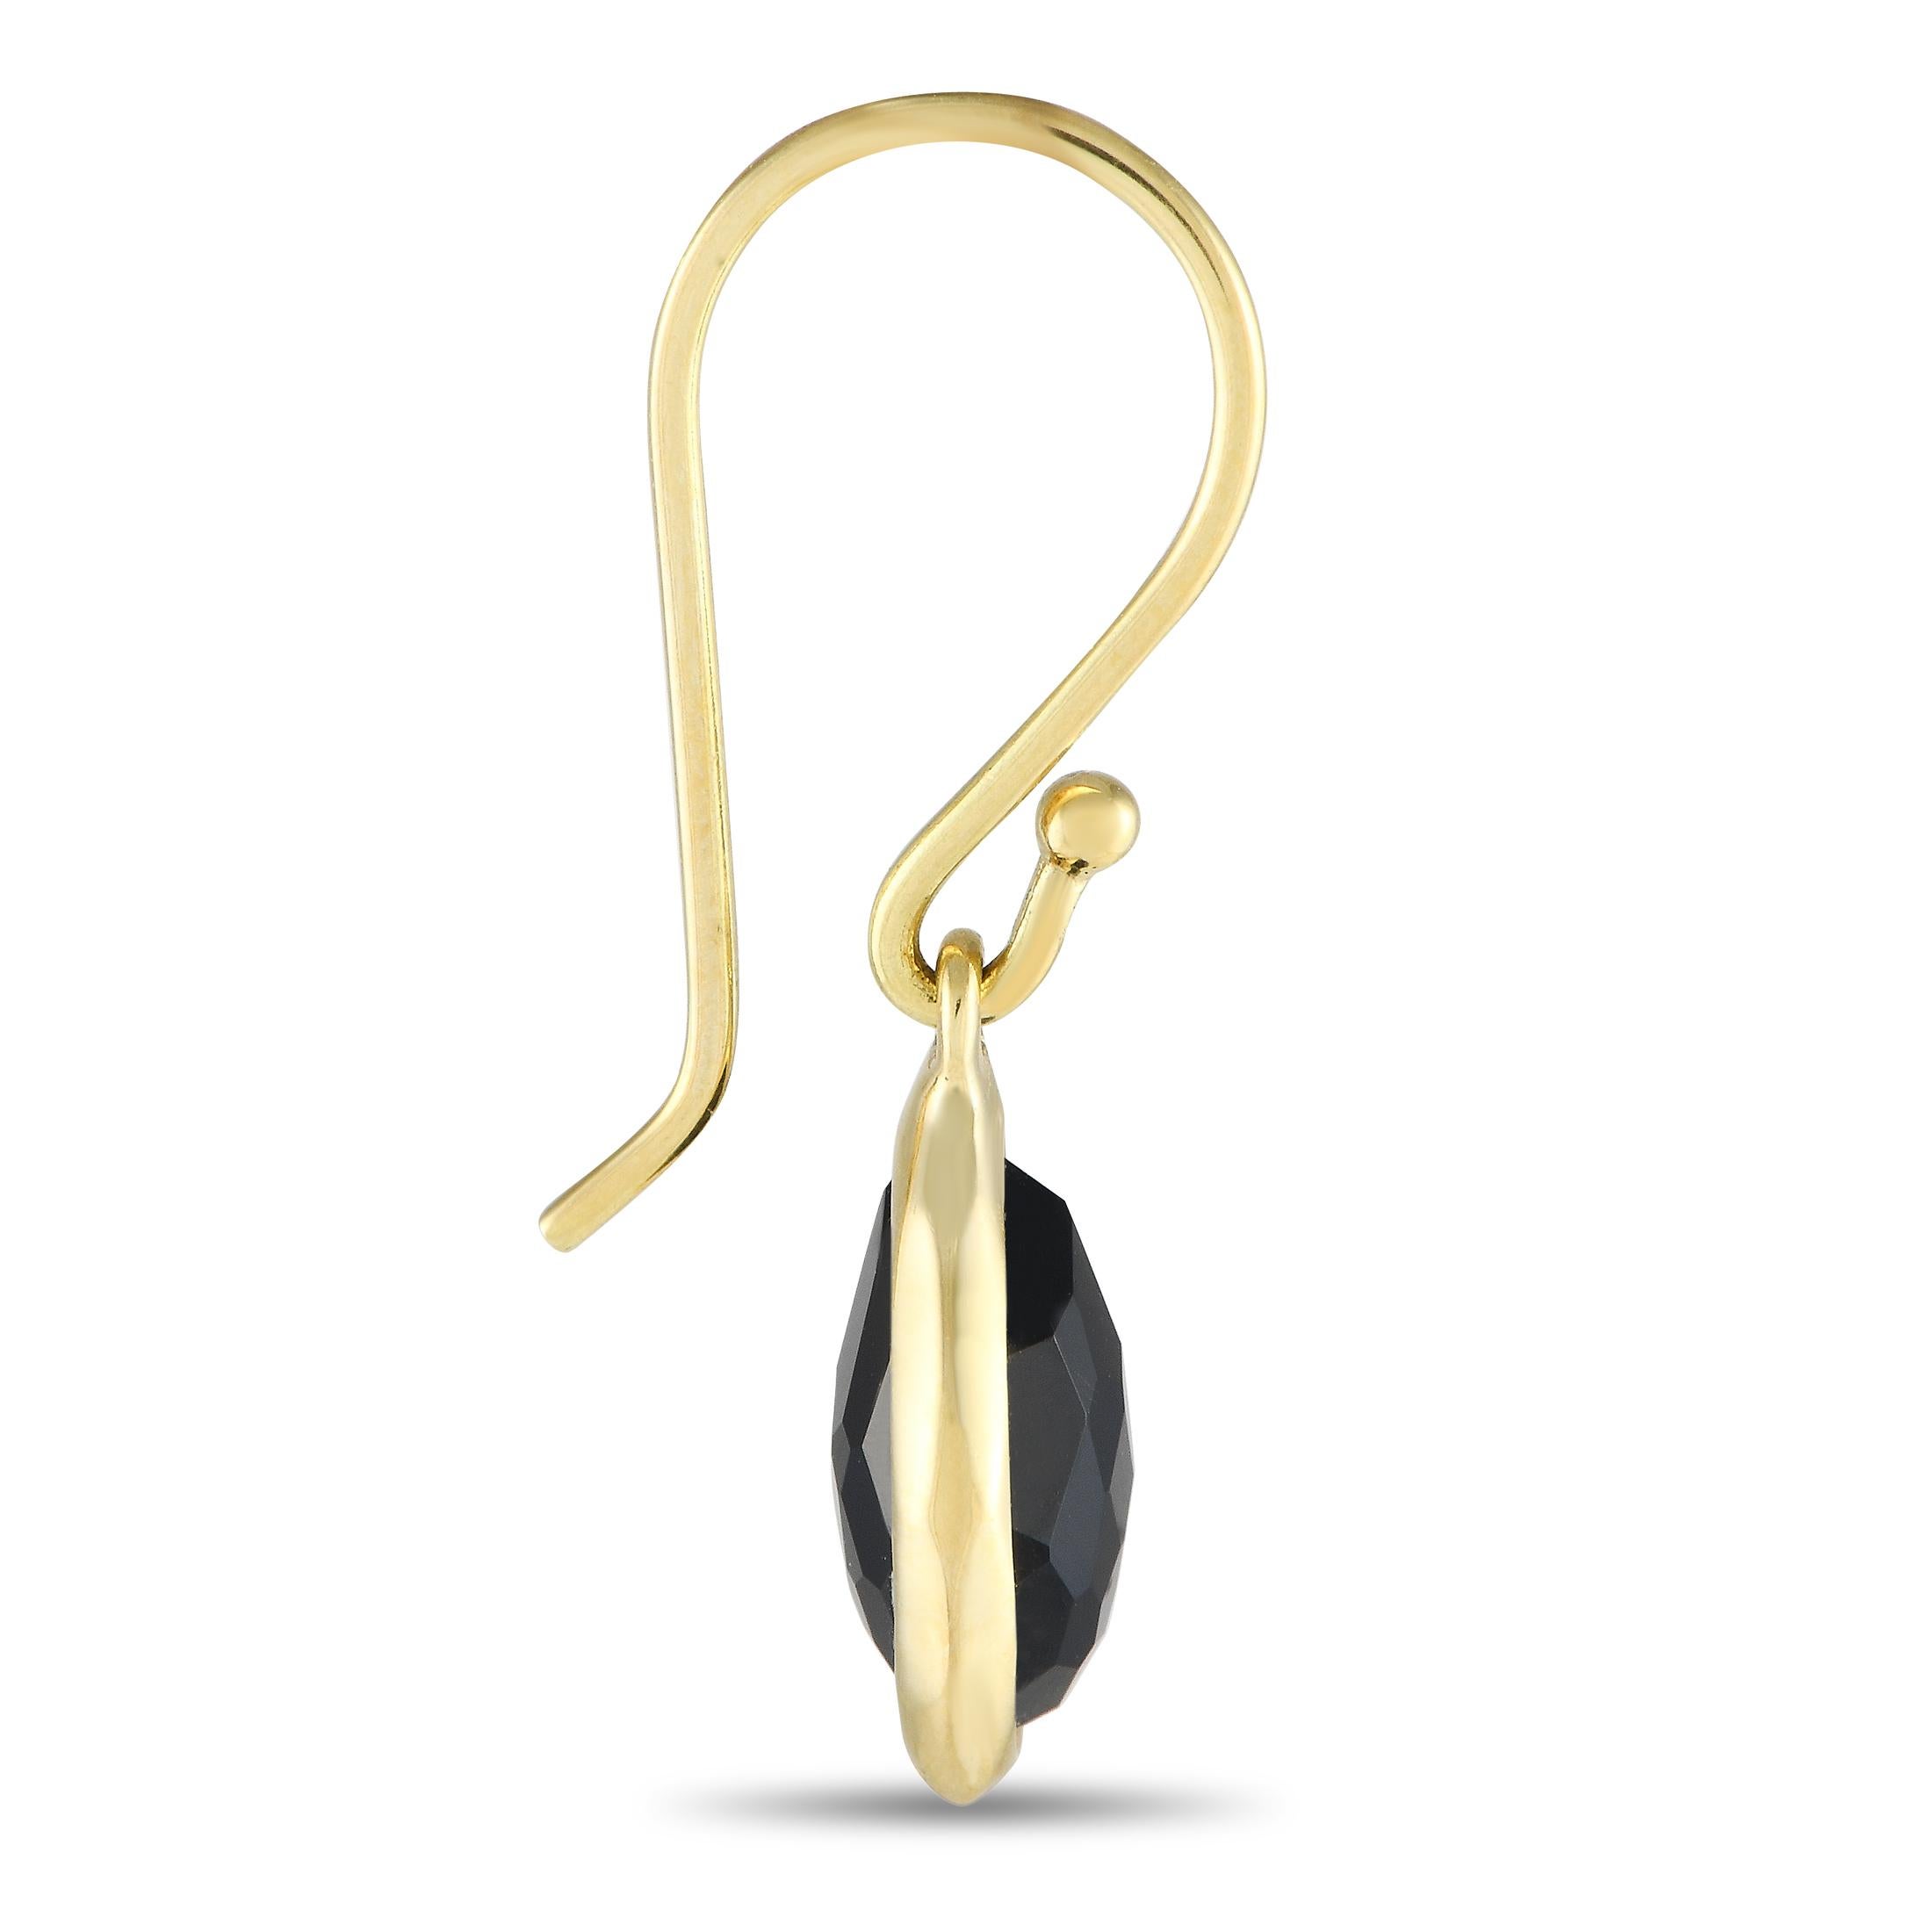 There’s something decidedly elegant about these classic Ippolita earrings. A singular pear-shaped Onyx stone contrasts beautifully against a simple 18K Yellow Gold setting on these exquisitely crafted earrings, which measure 0.90” long and 0.25”